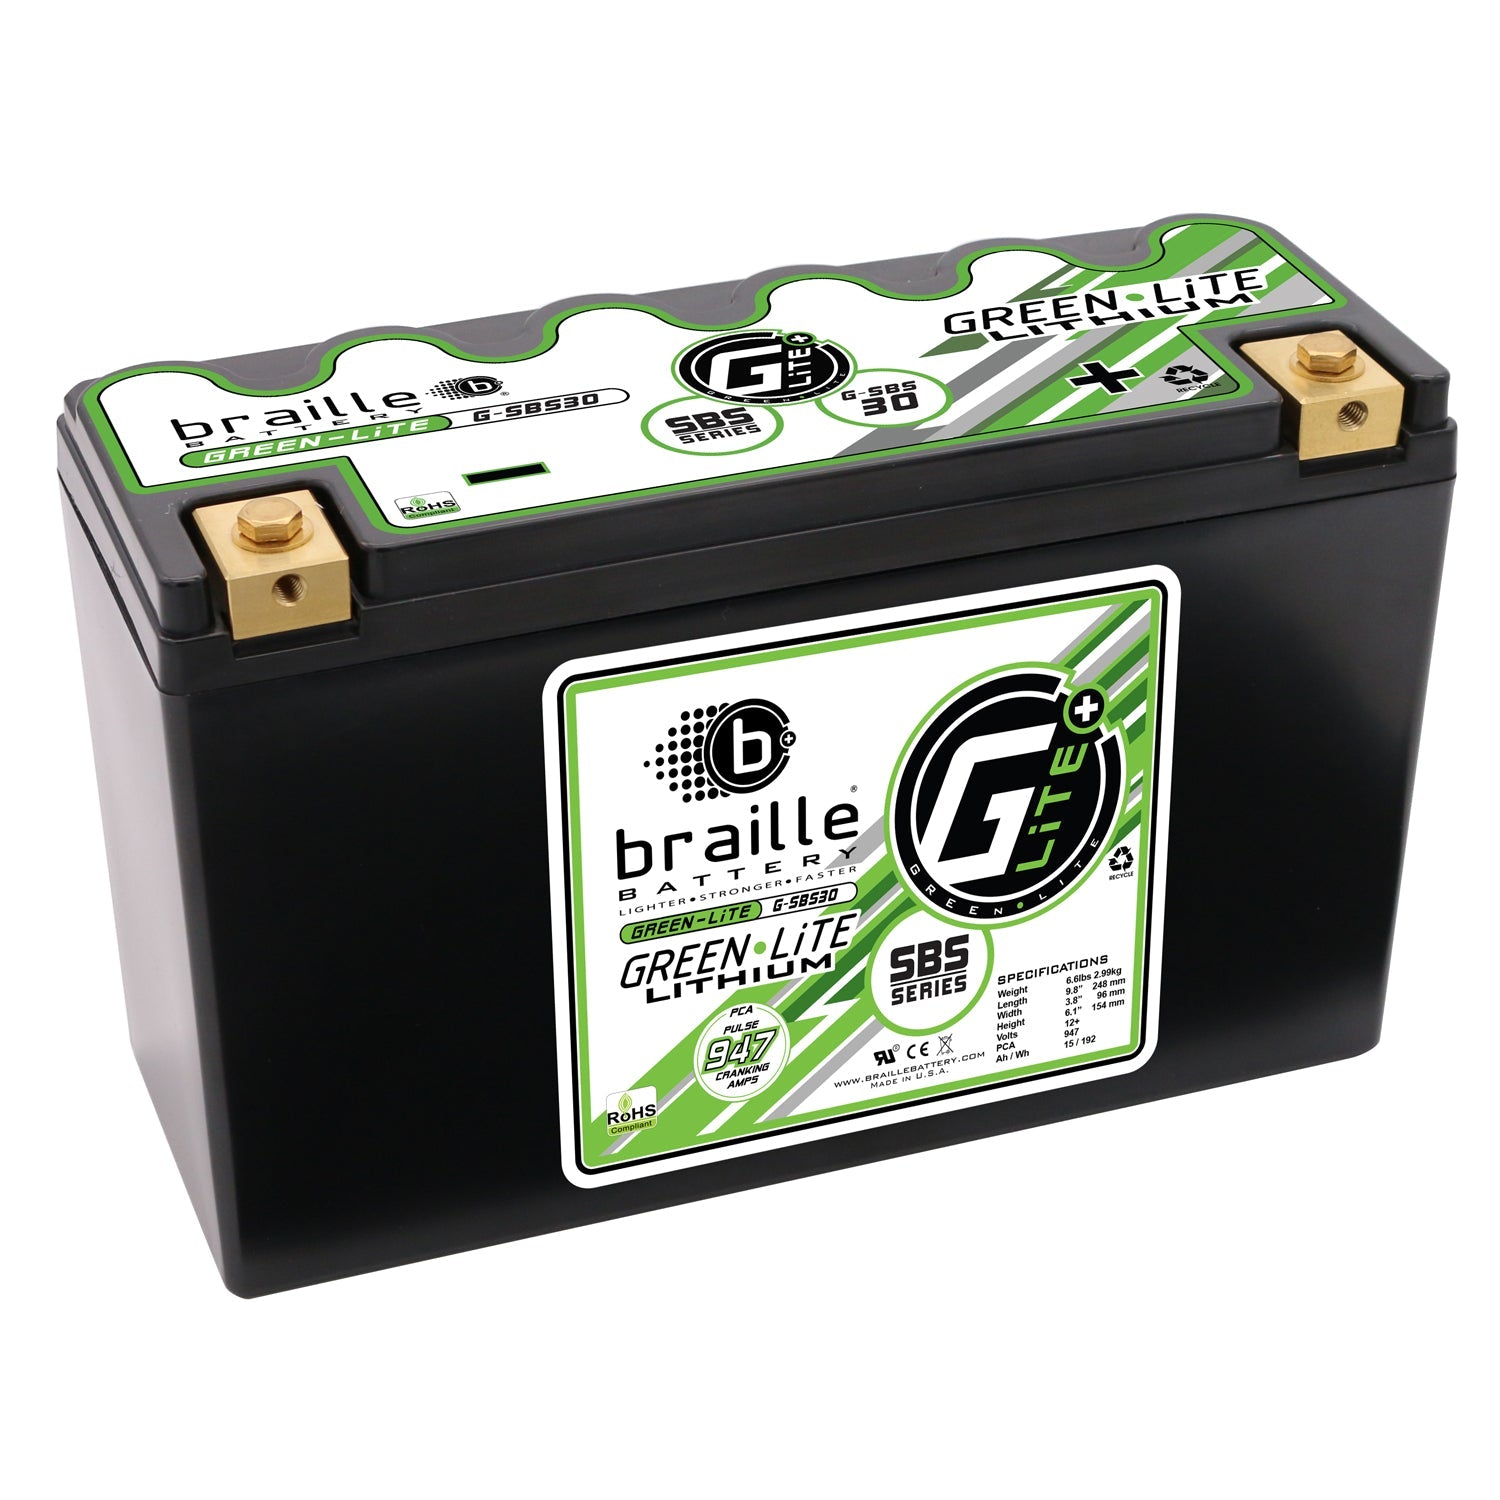 G-SBS30S Green-Lite Lithium Ion 12-Volt Battery Automotive/Racing BCI Group Size: 30 [Extra-Capacity]